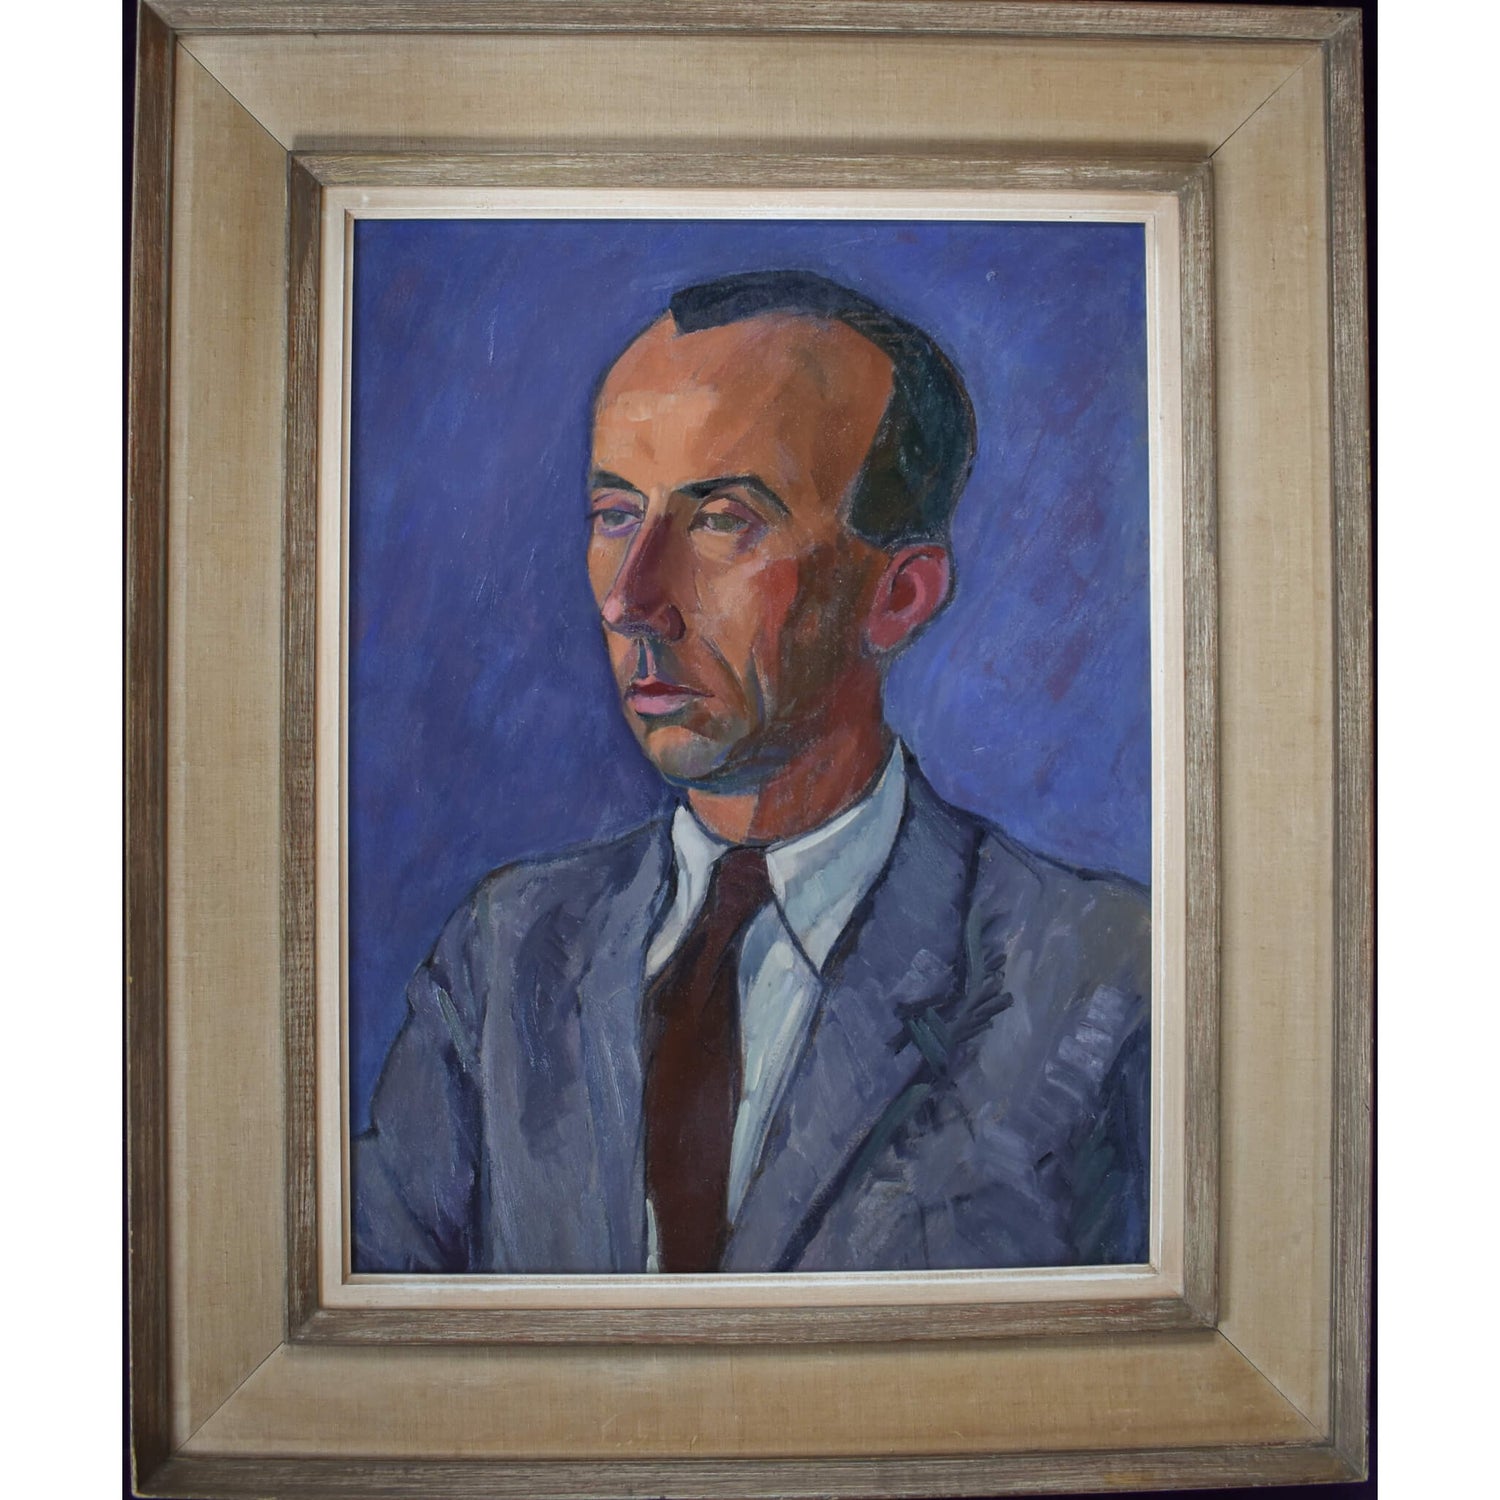 Vintage oil painting on cardboard portrait of a man by Paul Rivoire for sale at Winckelmann Gallery